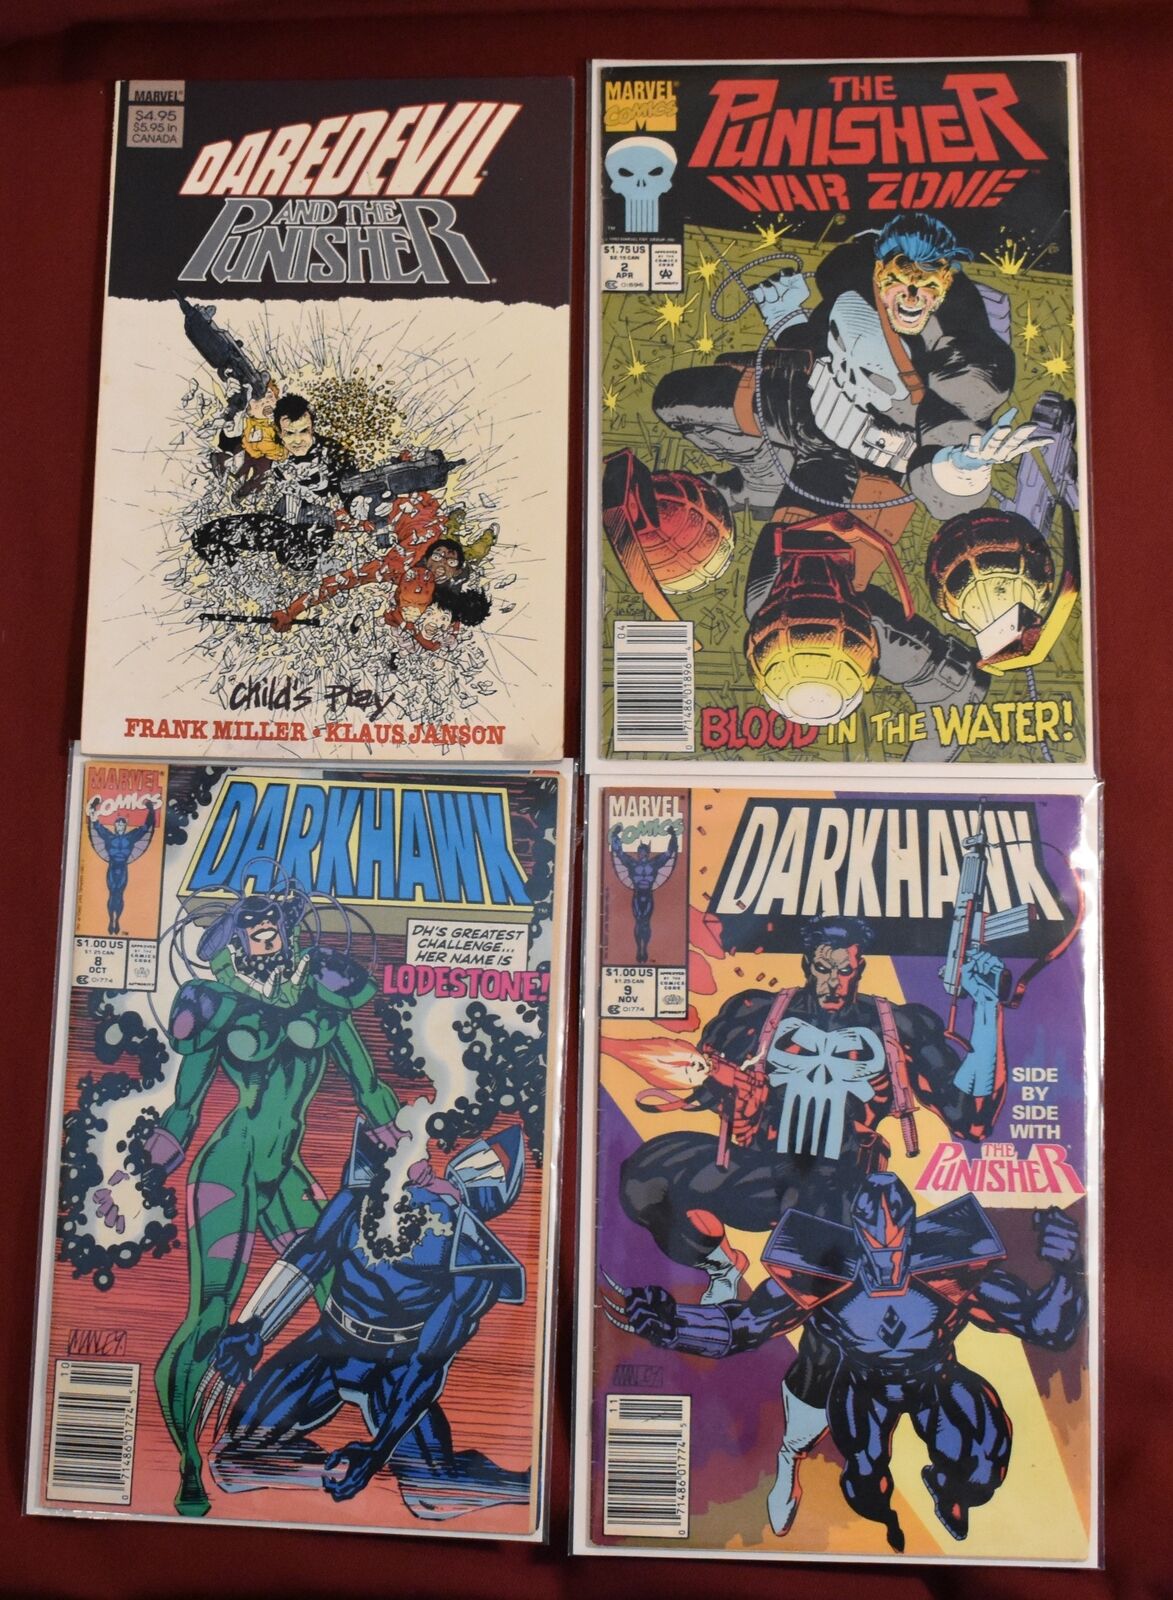 Four Marvel Comic Books, Daredevil and the Punisher, Darkhawk and the Punisher